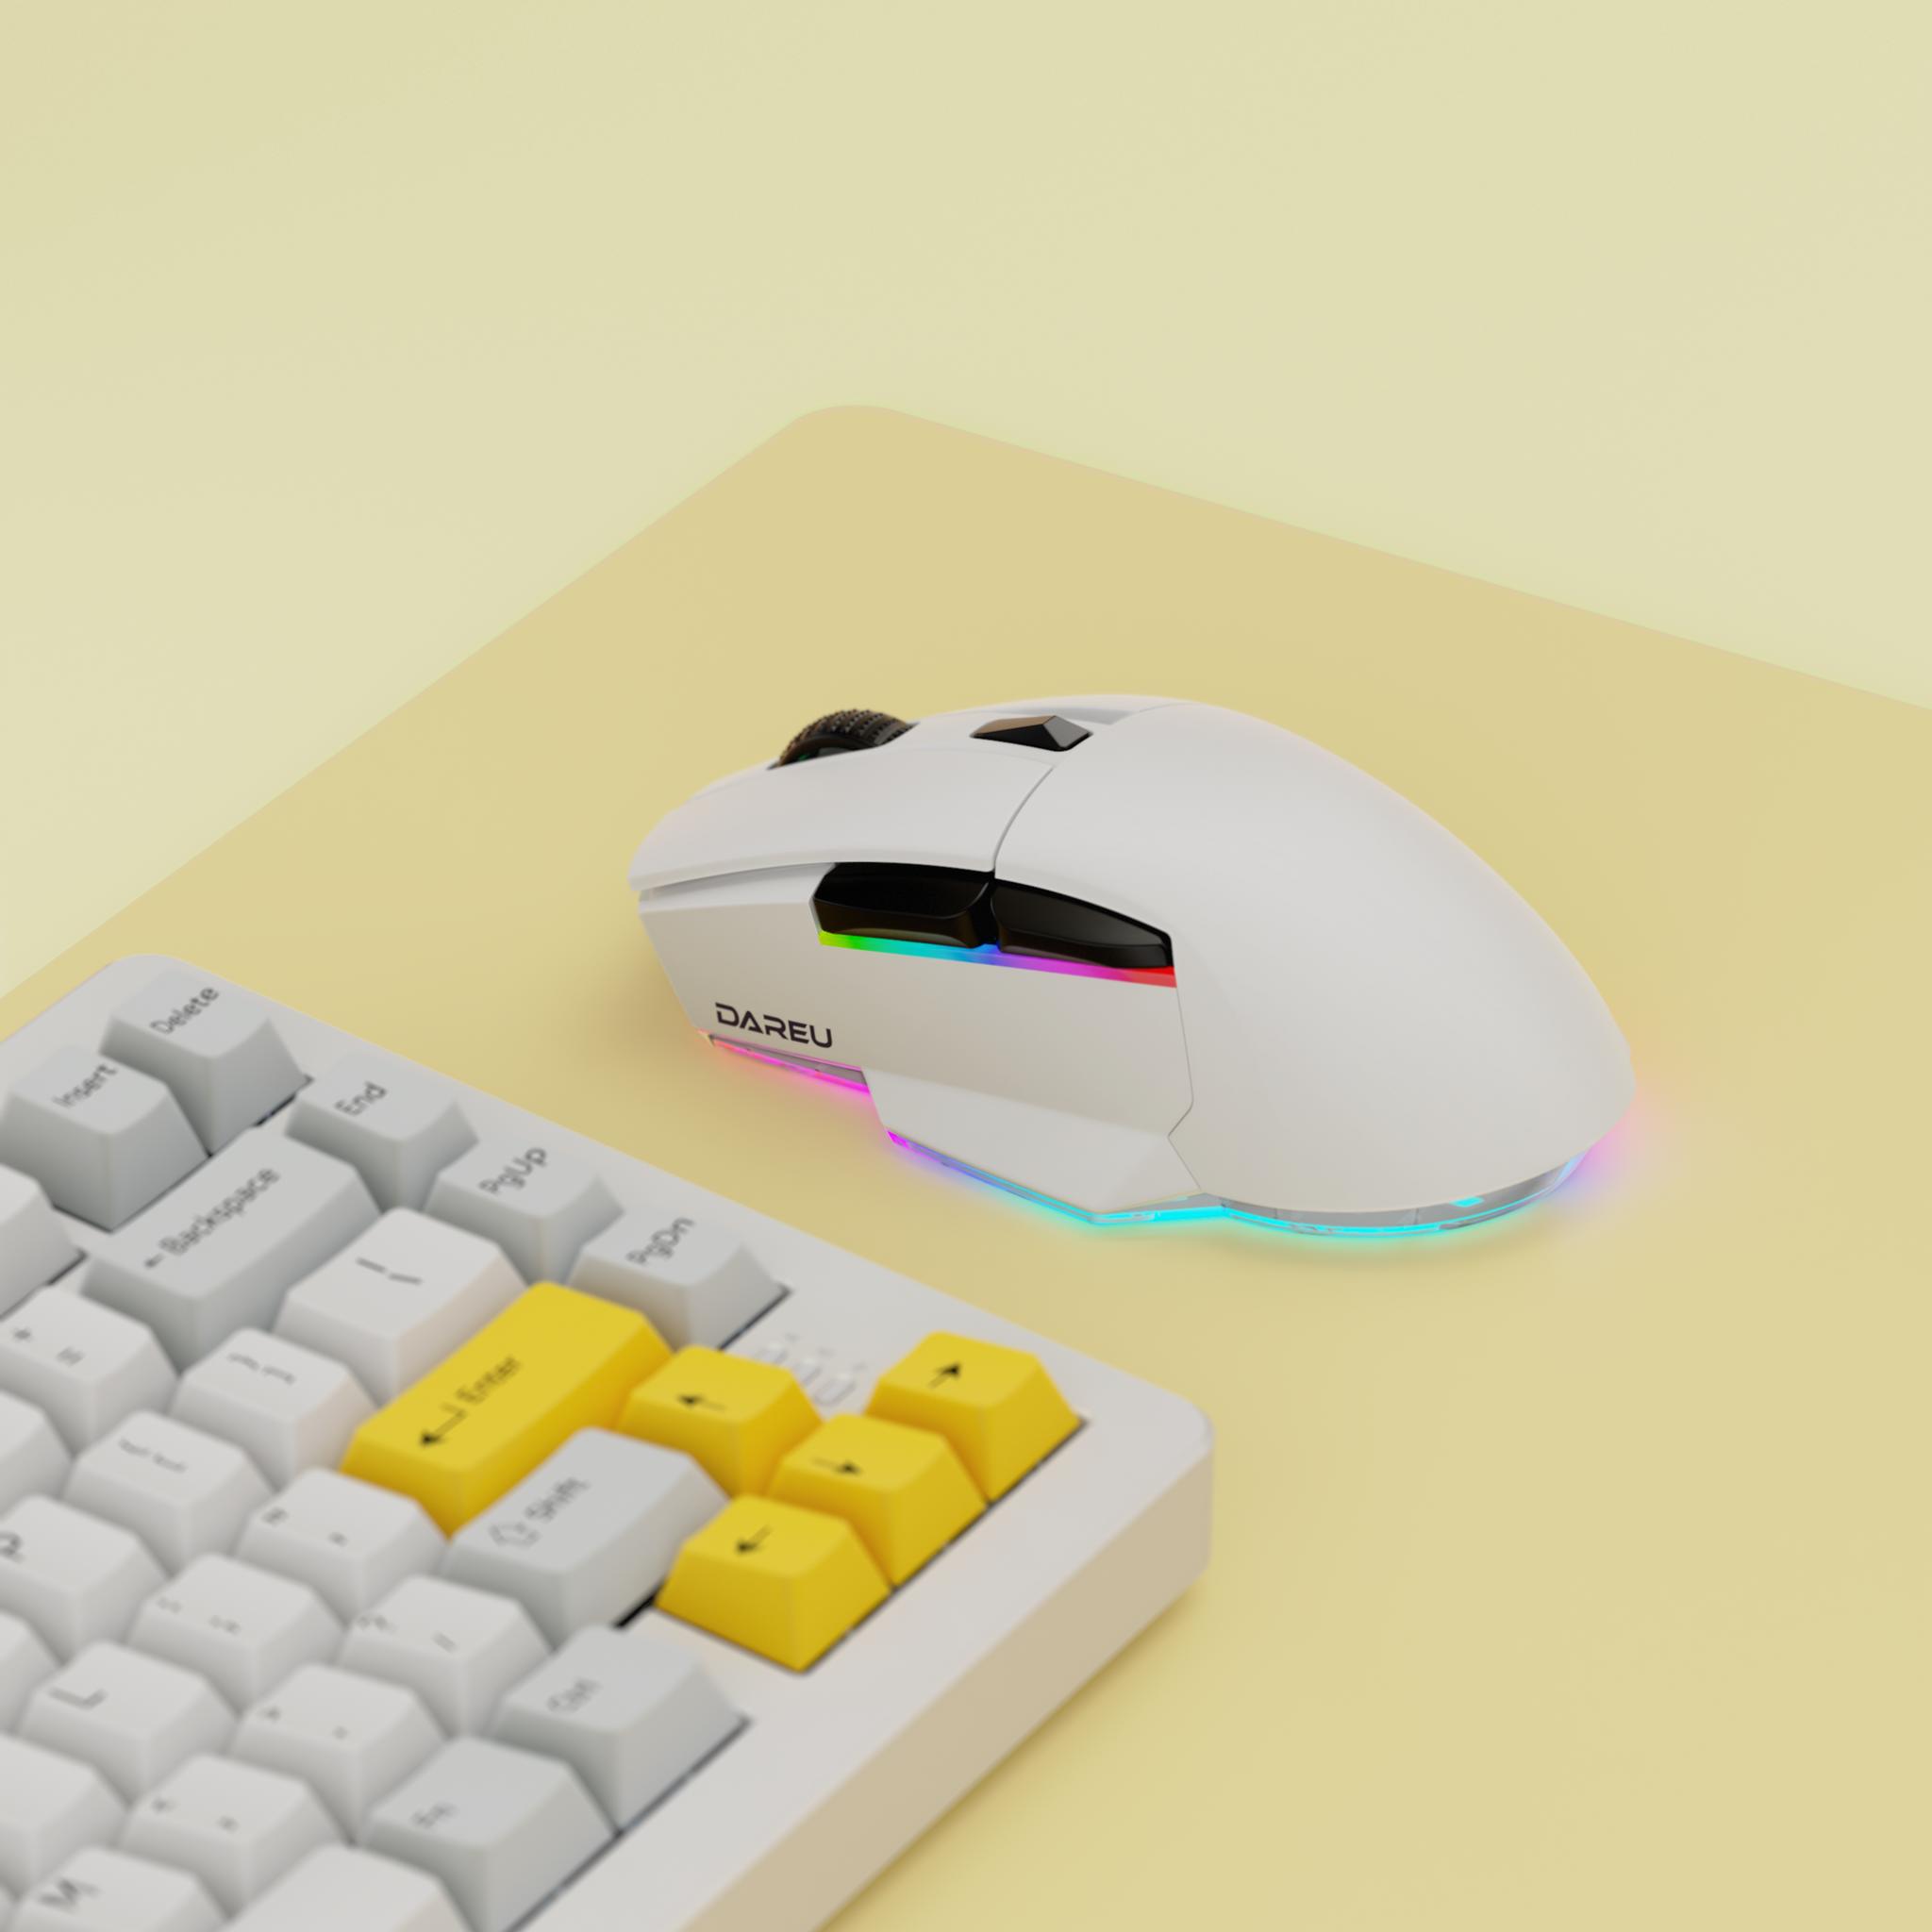 Buying a Wireless Mouse is worth it!